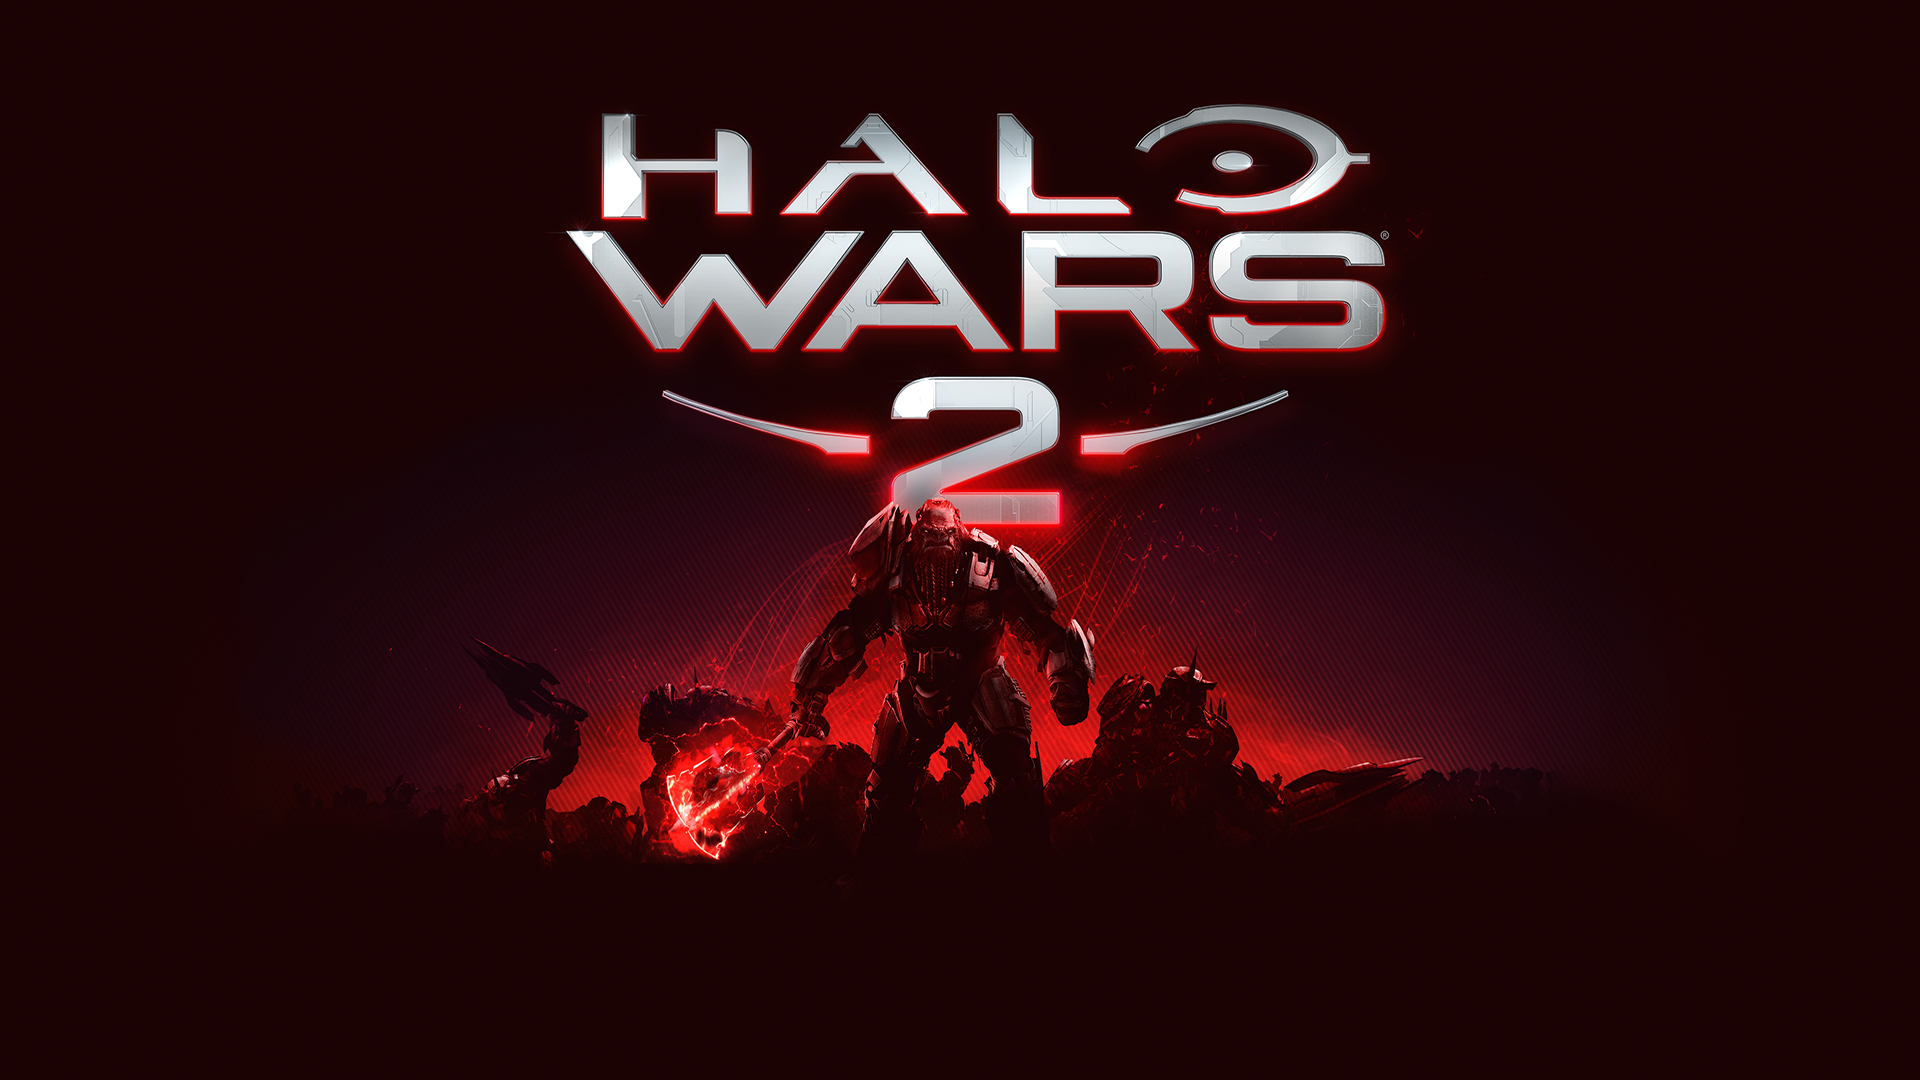 halo wars 2 wallpaper,red,text,font,geological phenomenon,games